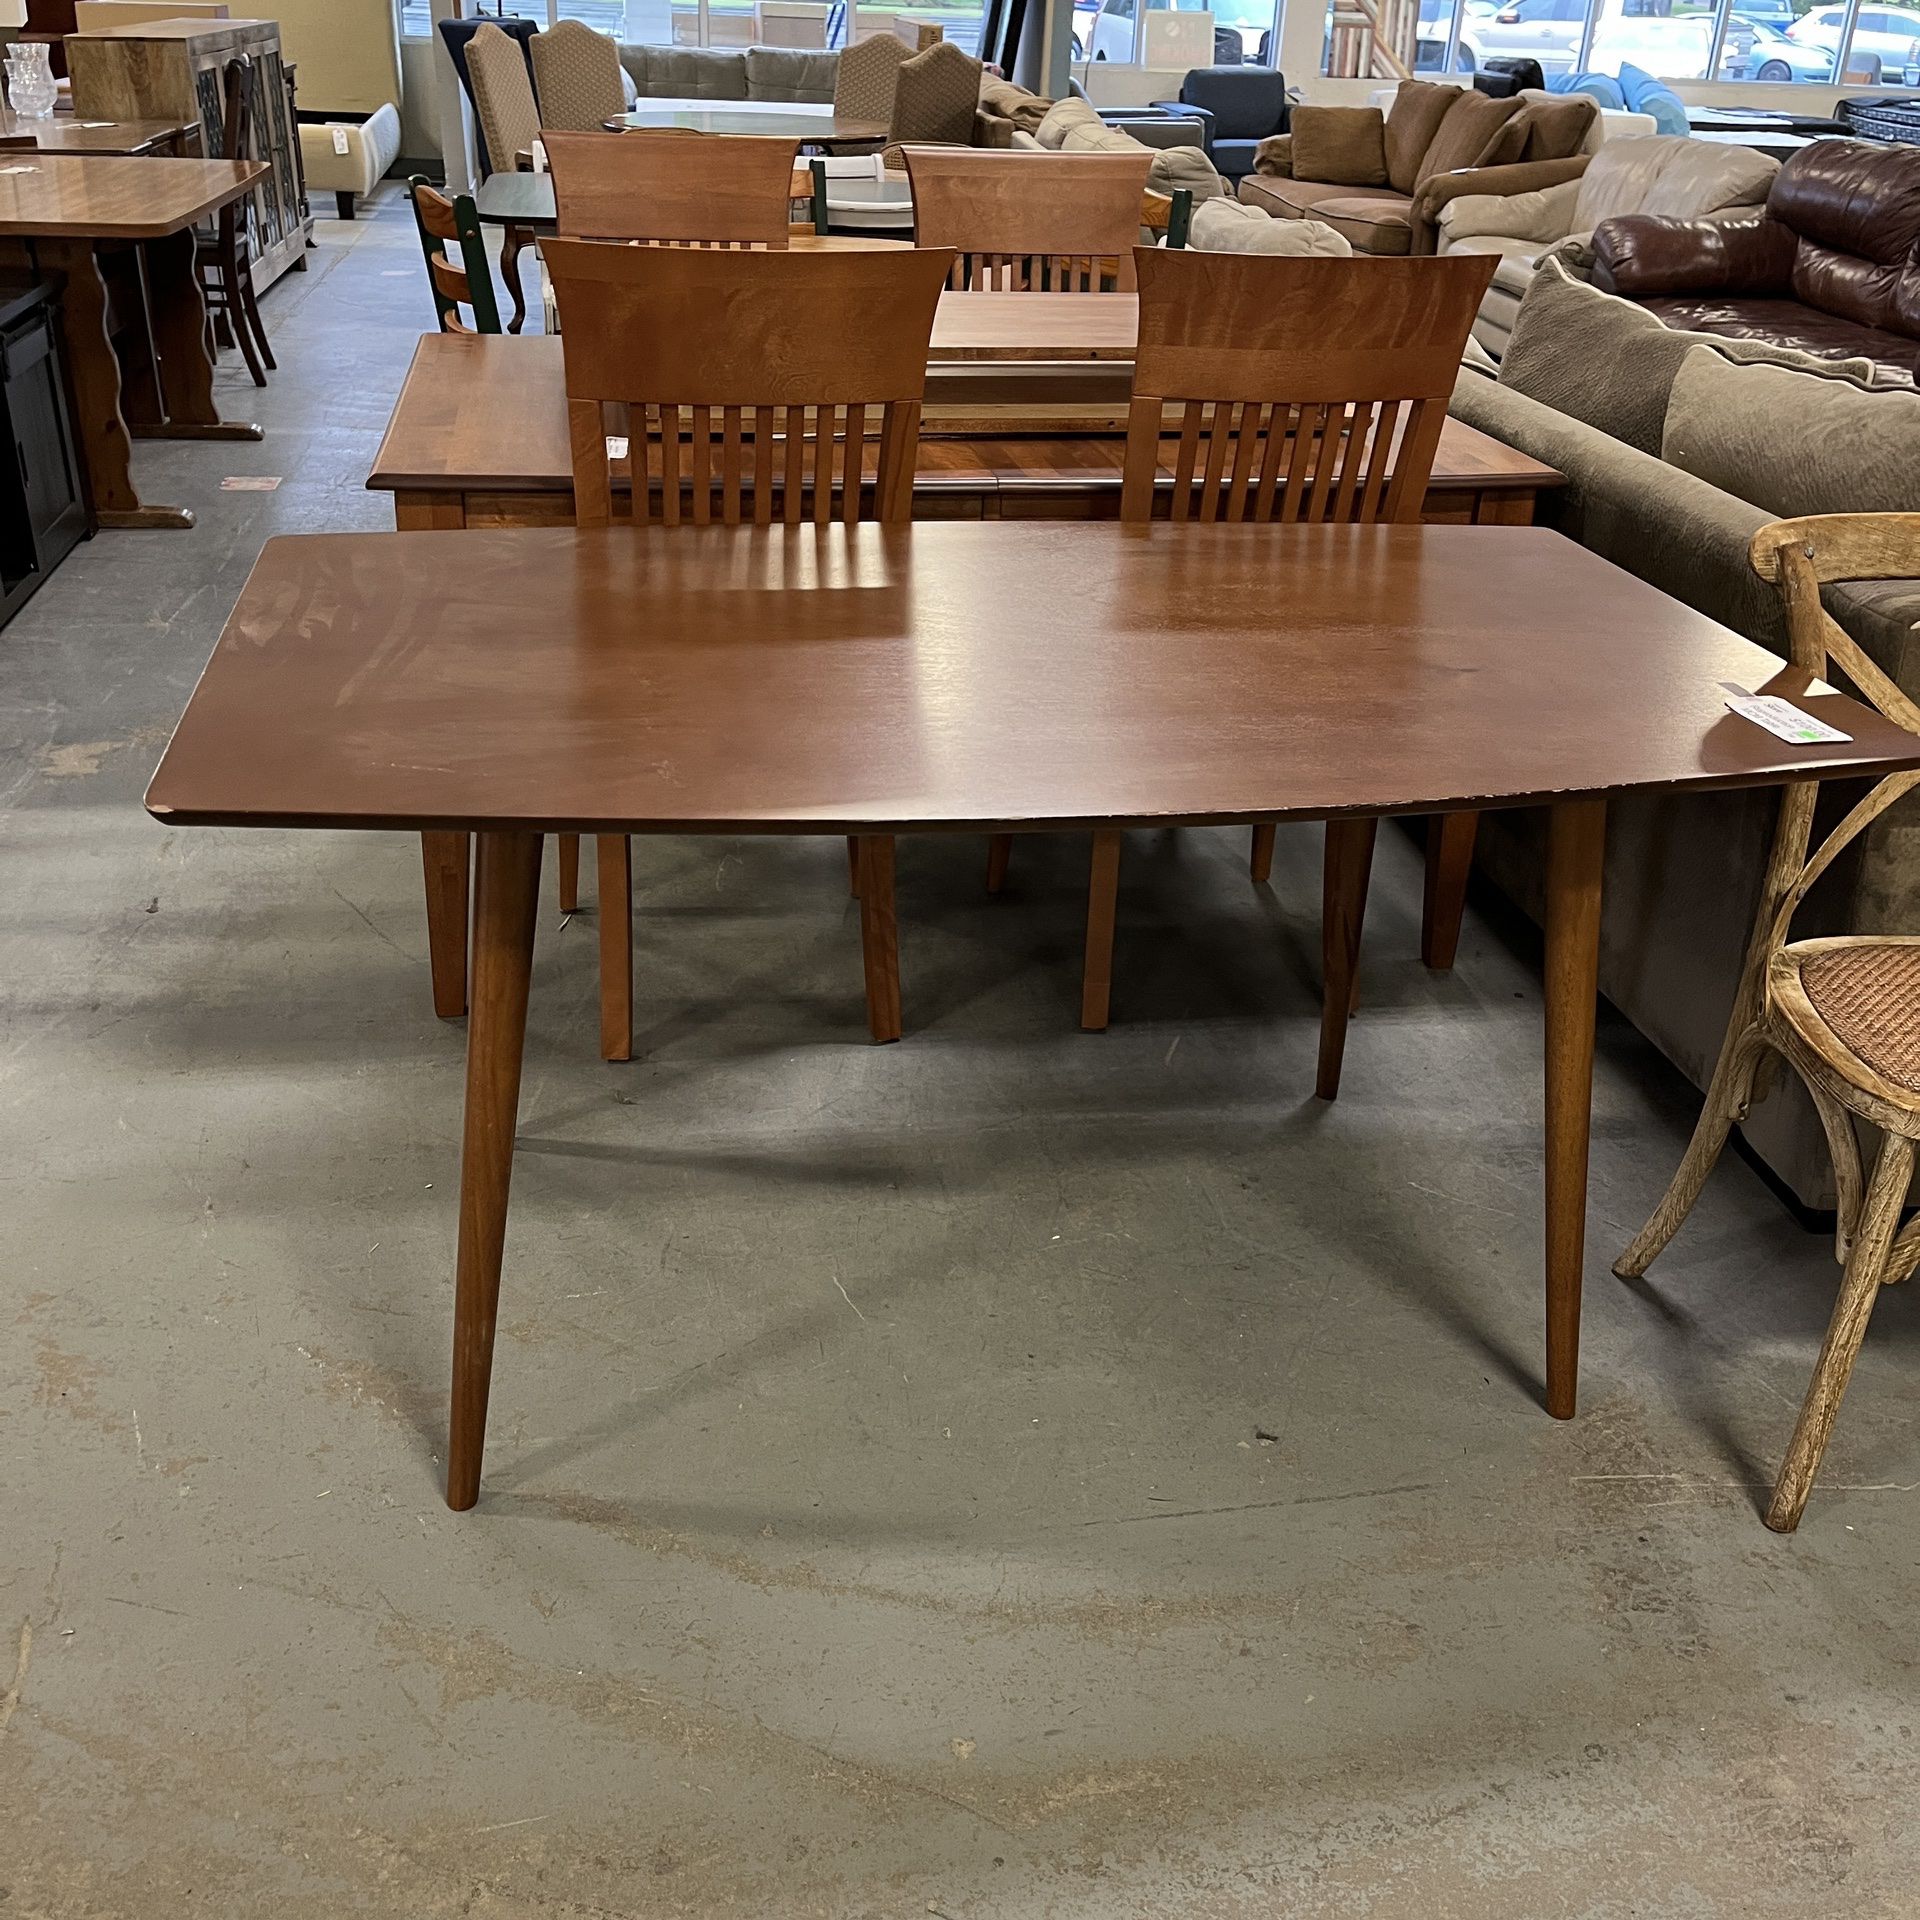 Reproduction MCM Style Table (in Store) 